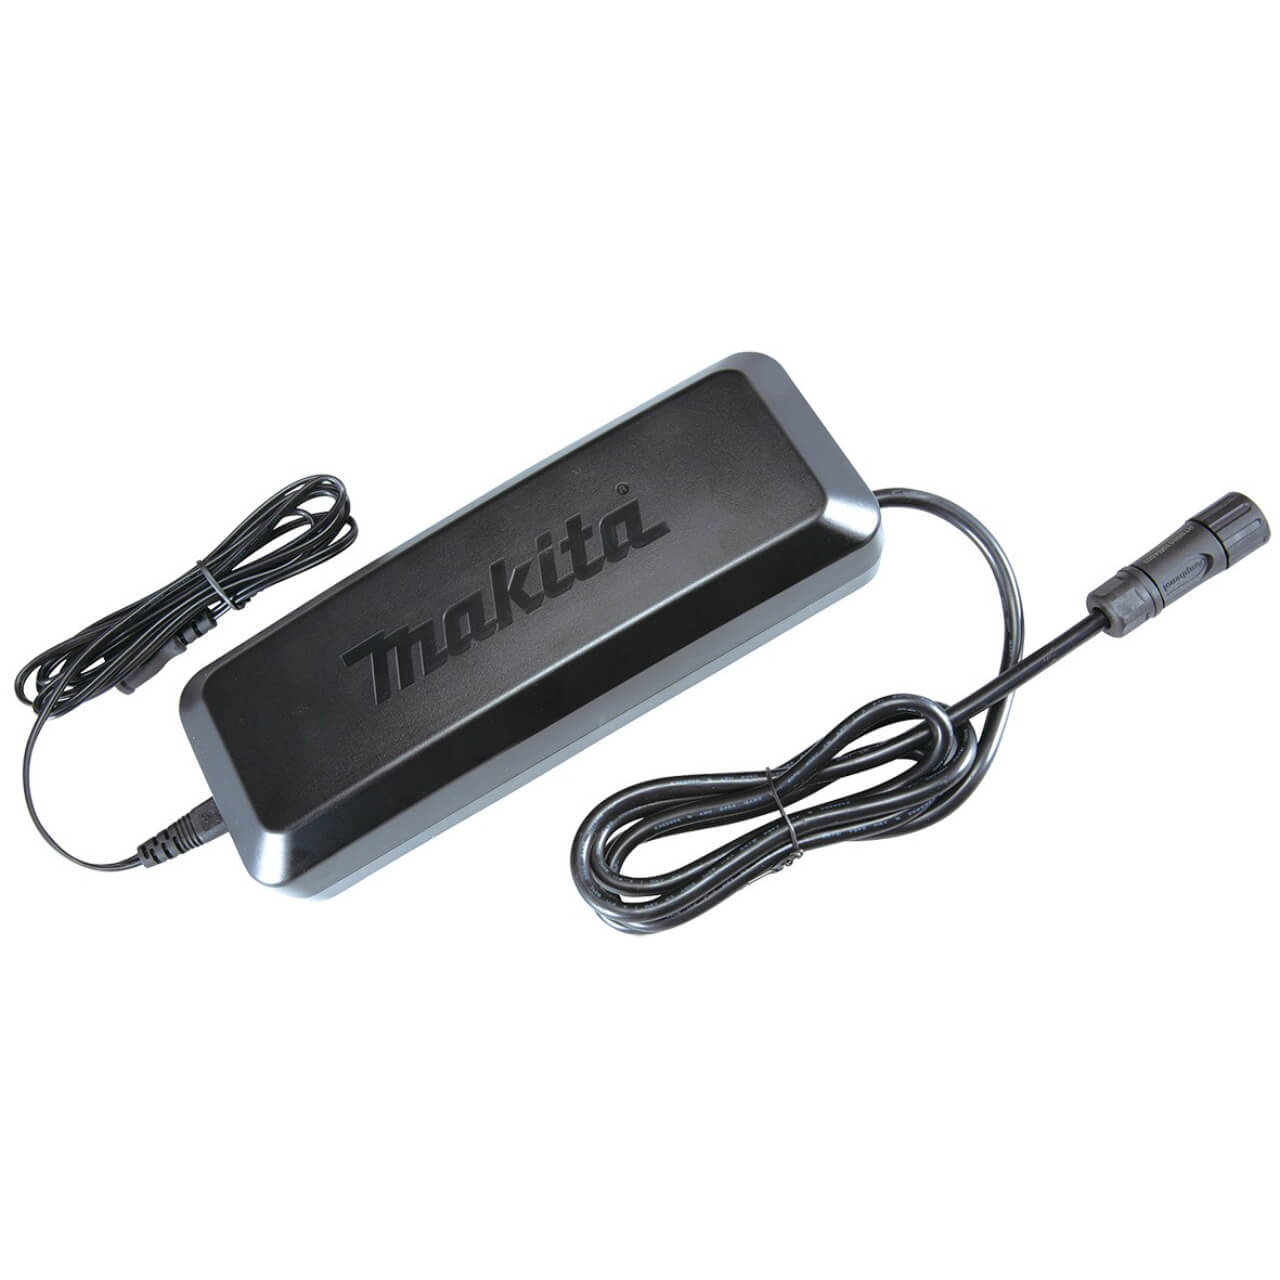 Makita 33.5Ah Portable Power Supply - Includes: Charger